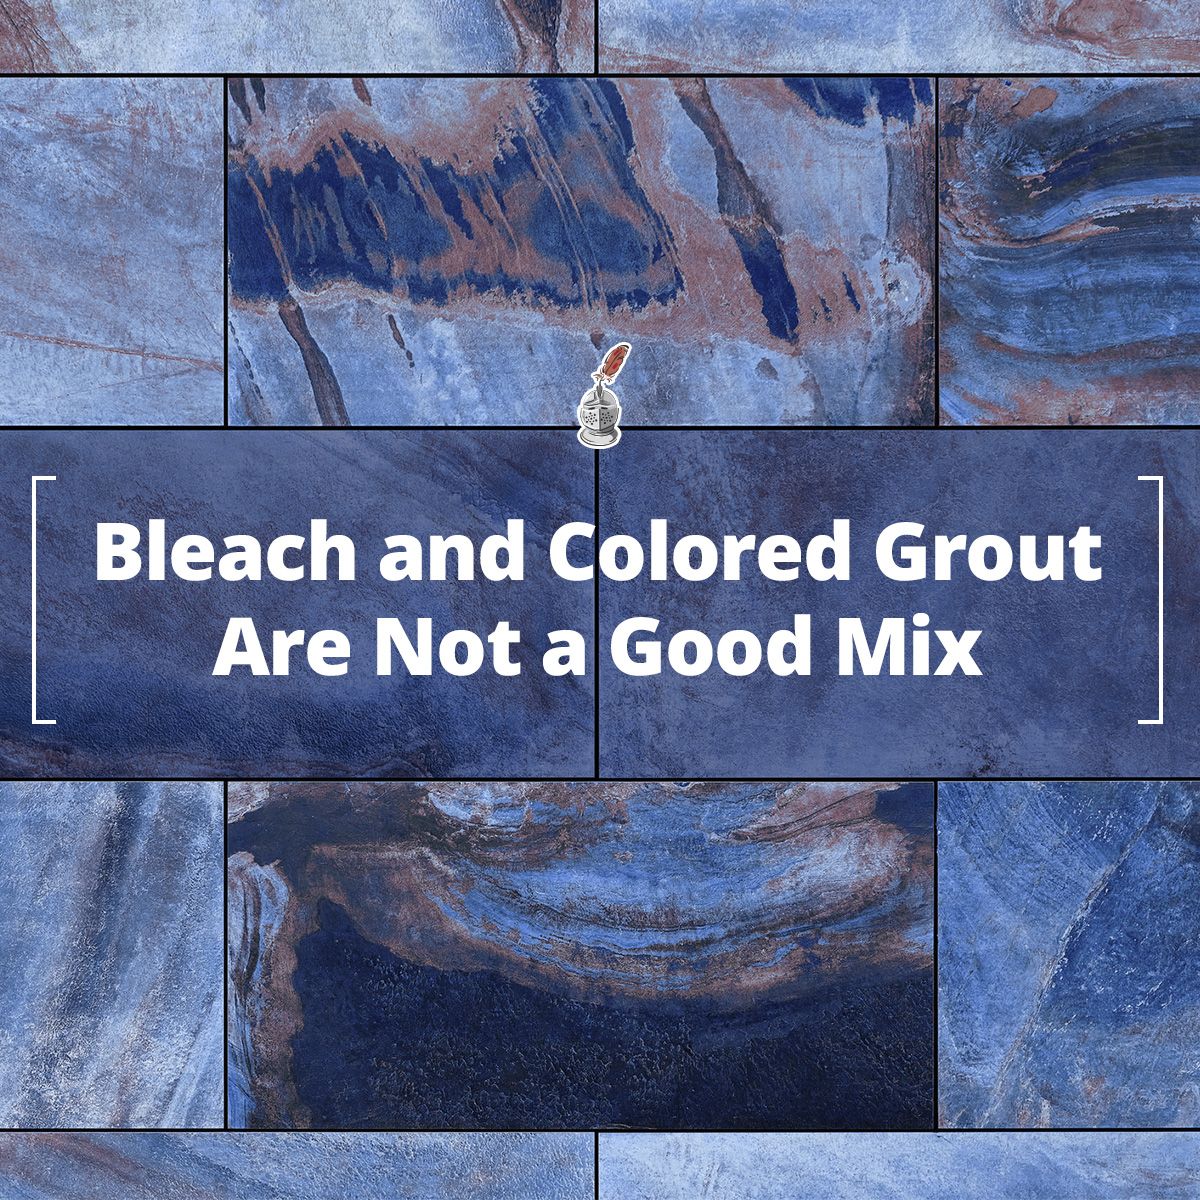 Bleach and Colored Grout Are Not a Good Mix